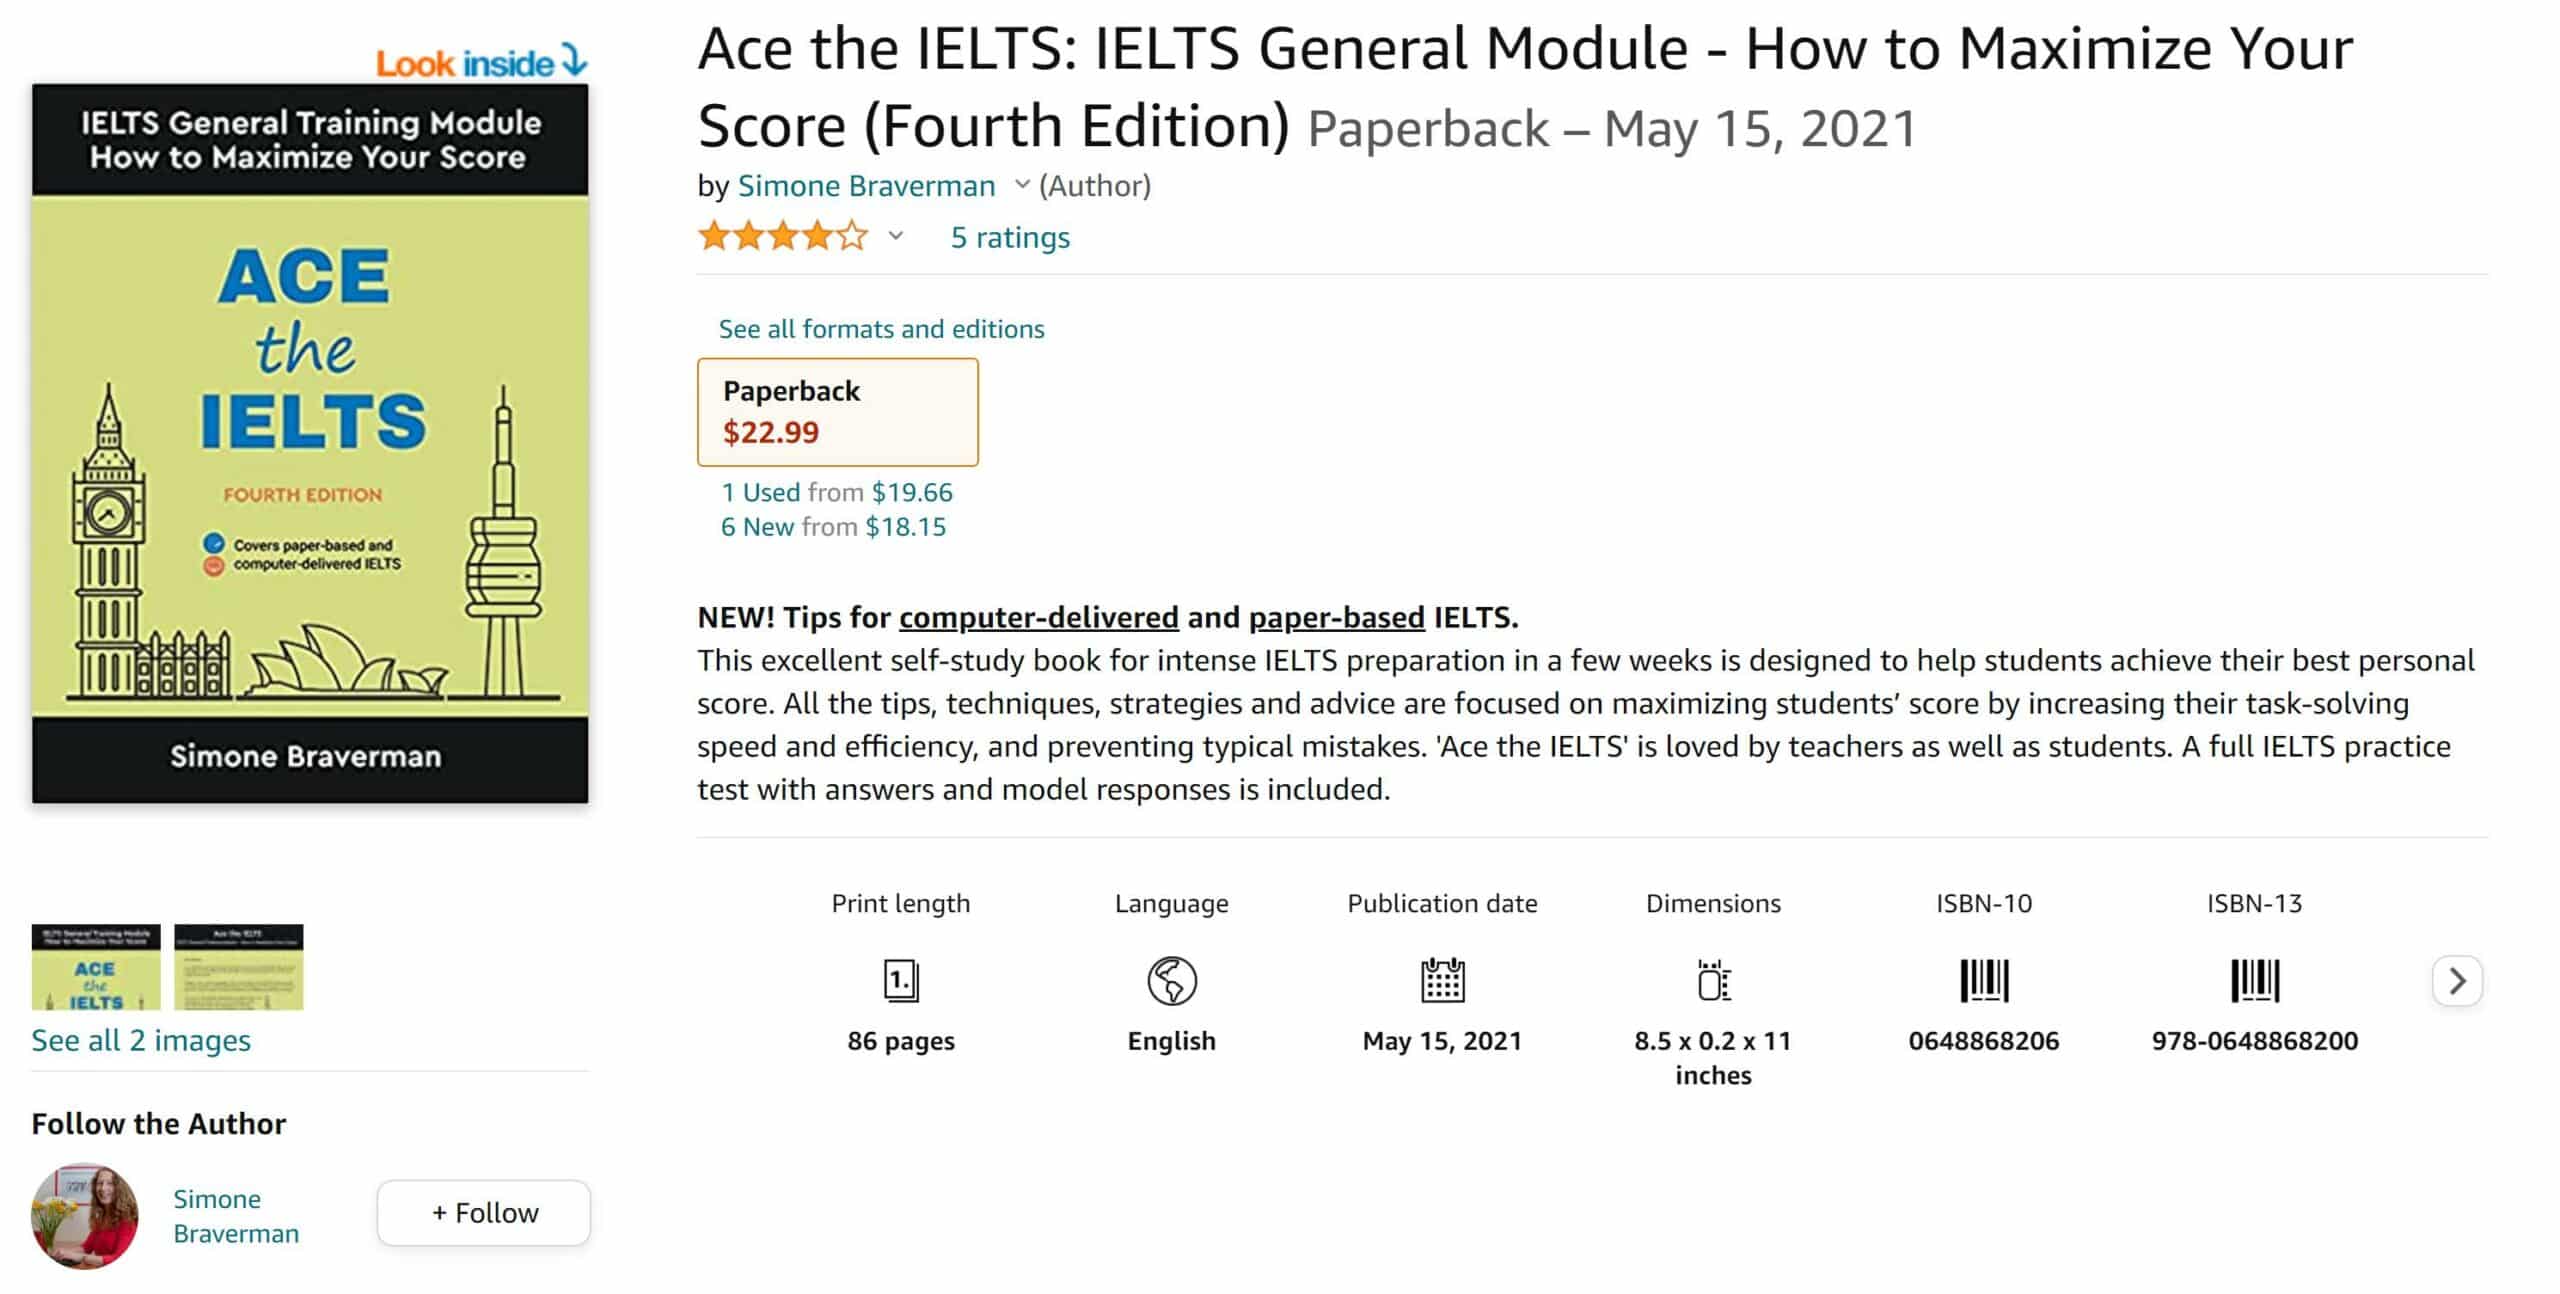 Ace the IELTS Book or Guide